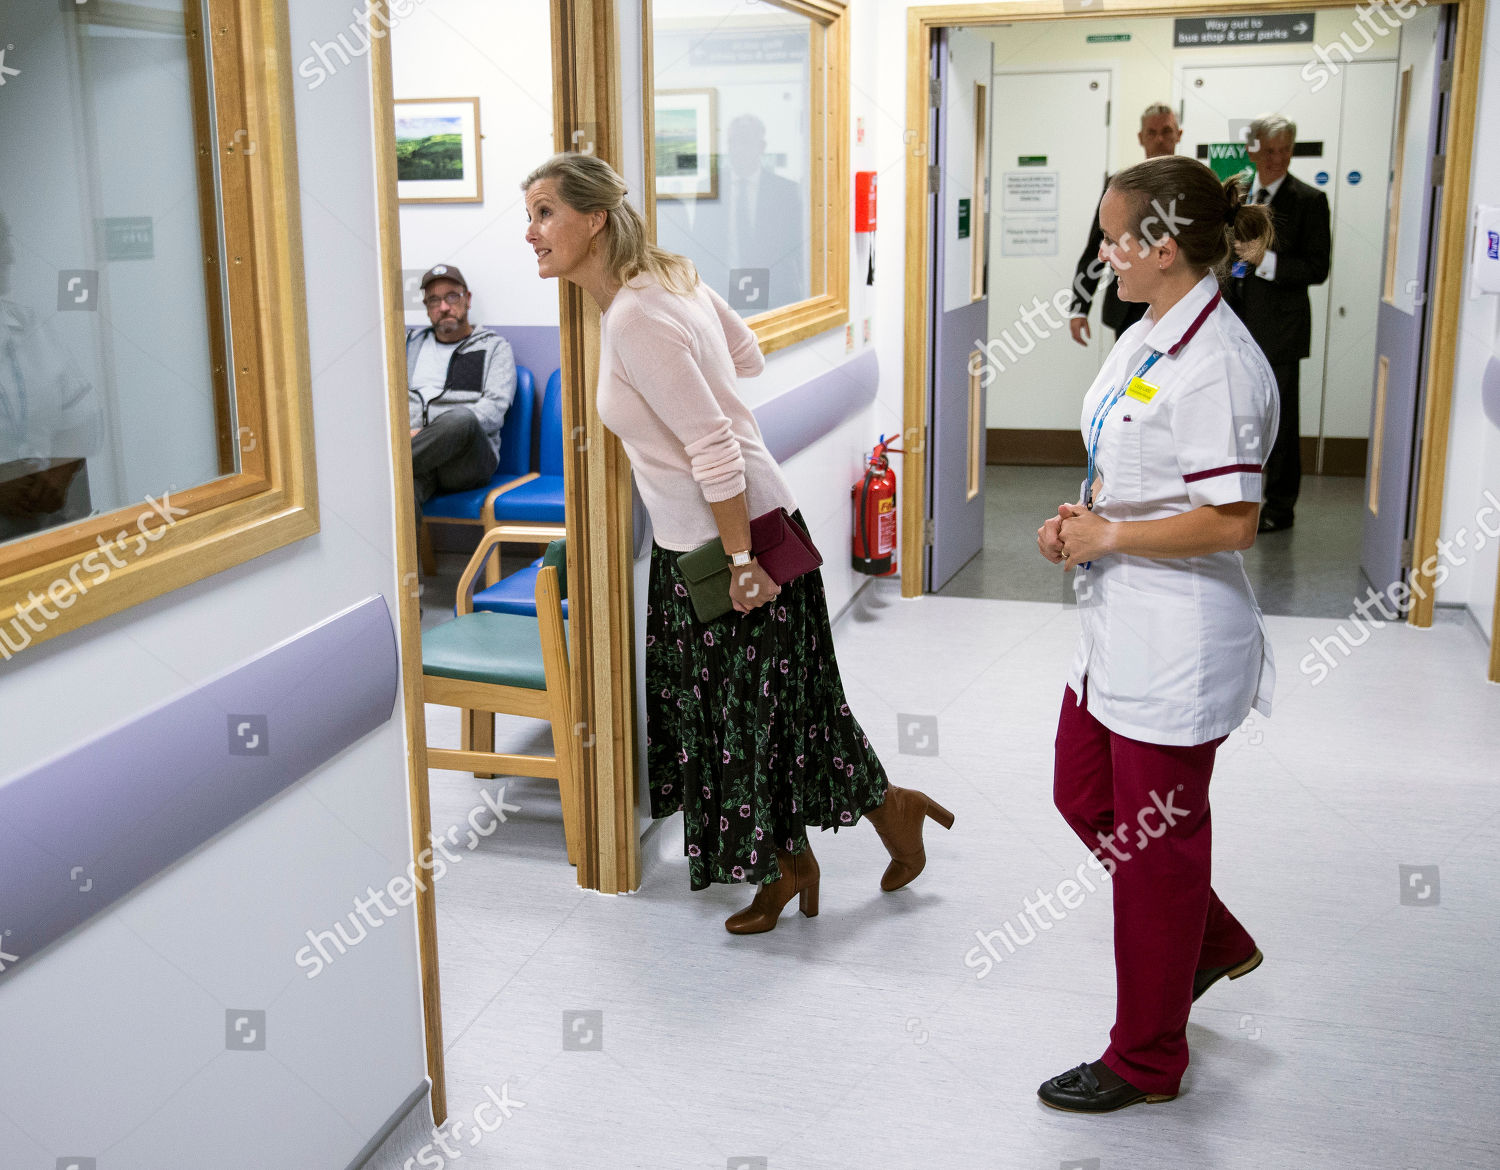 sophie-countess-of-wessex-visit-to-musgrove-park-hospital-taunton-somerset-uk-shutterstock-editorial-10422506am.jpg